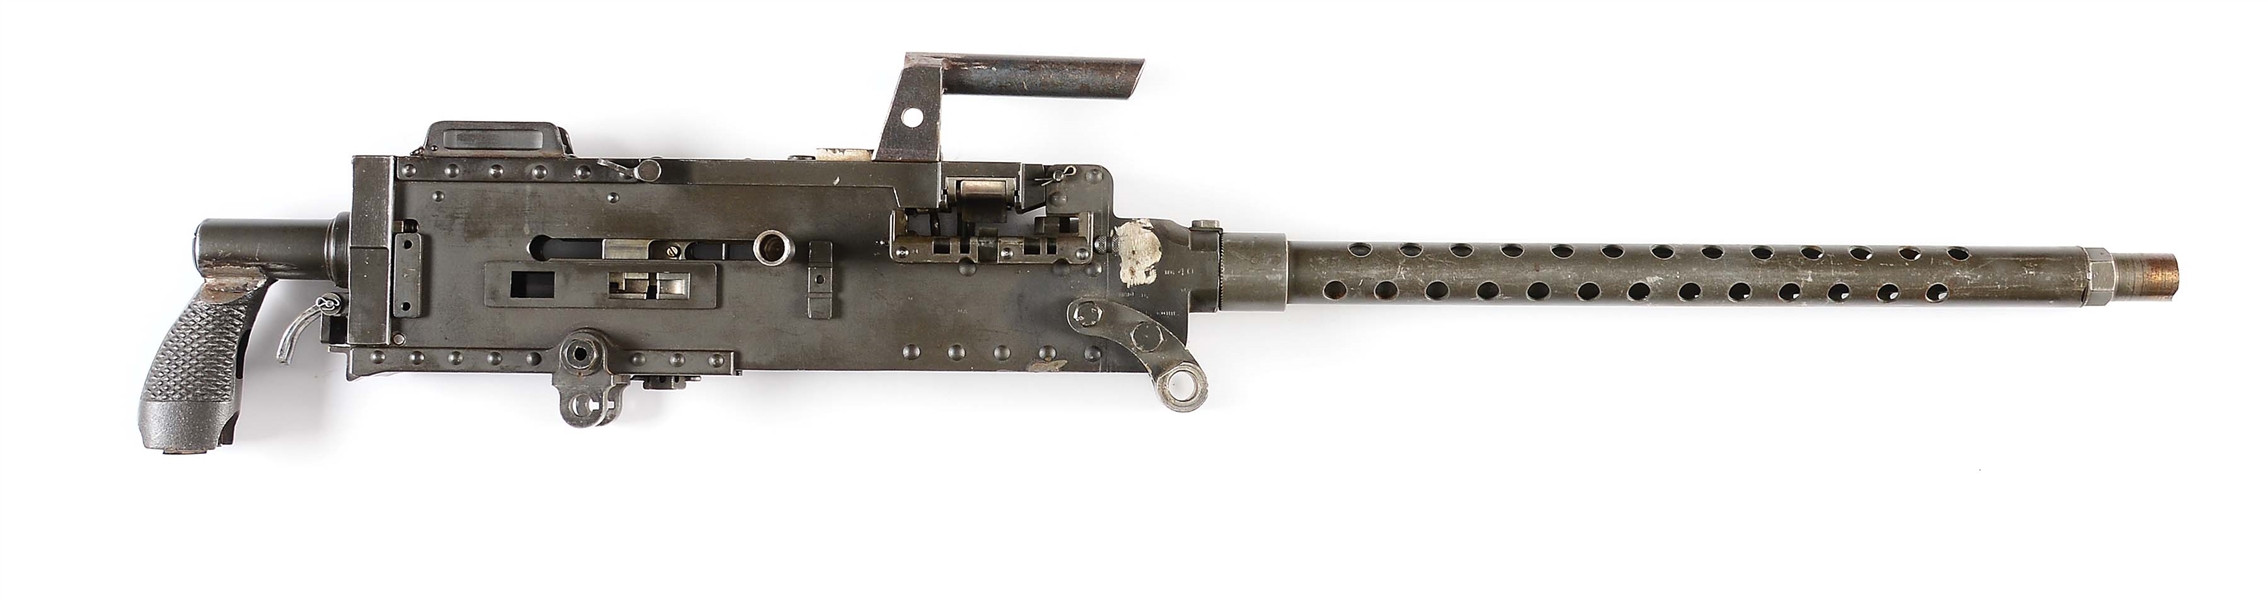 (N) BROWNING .30 CALIBER AIRCRAFT LIGHT MACHINE GUN AS MANUFACTURED BY MARANA ARMS (FULLY TRANSFERABLE).